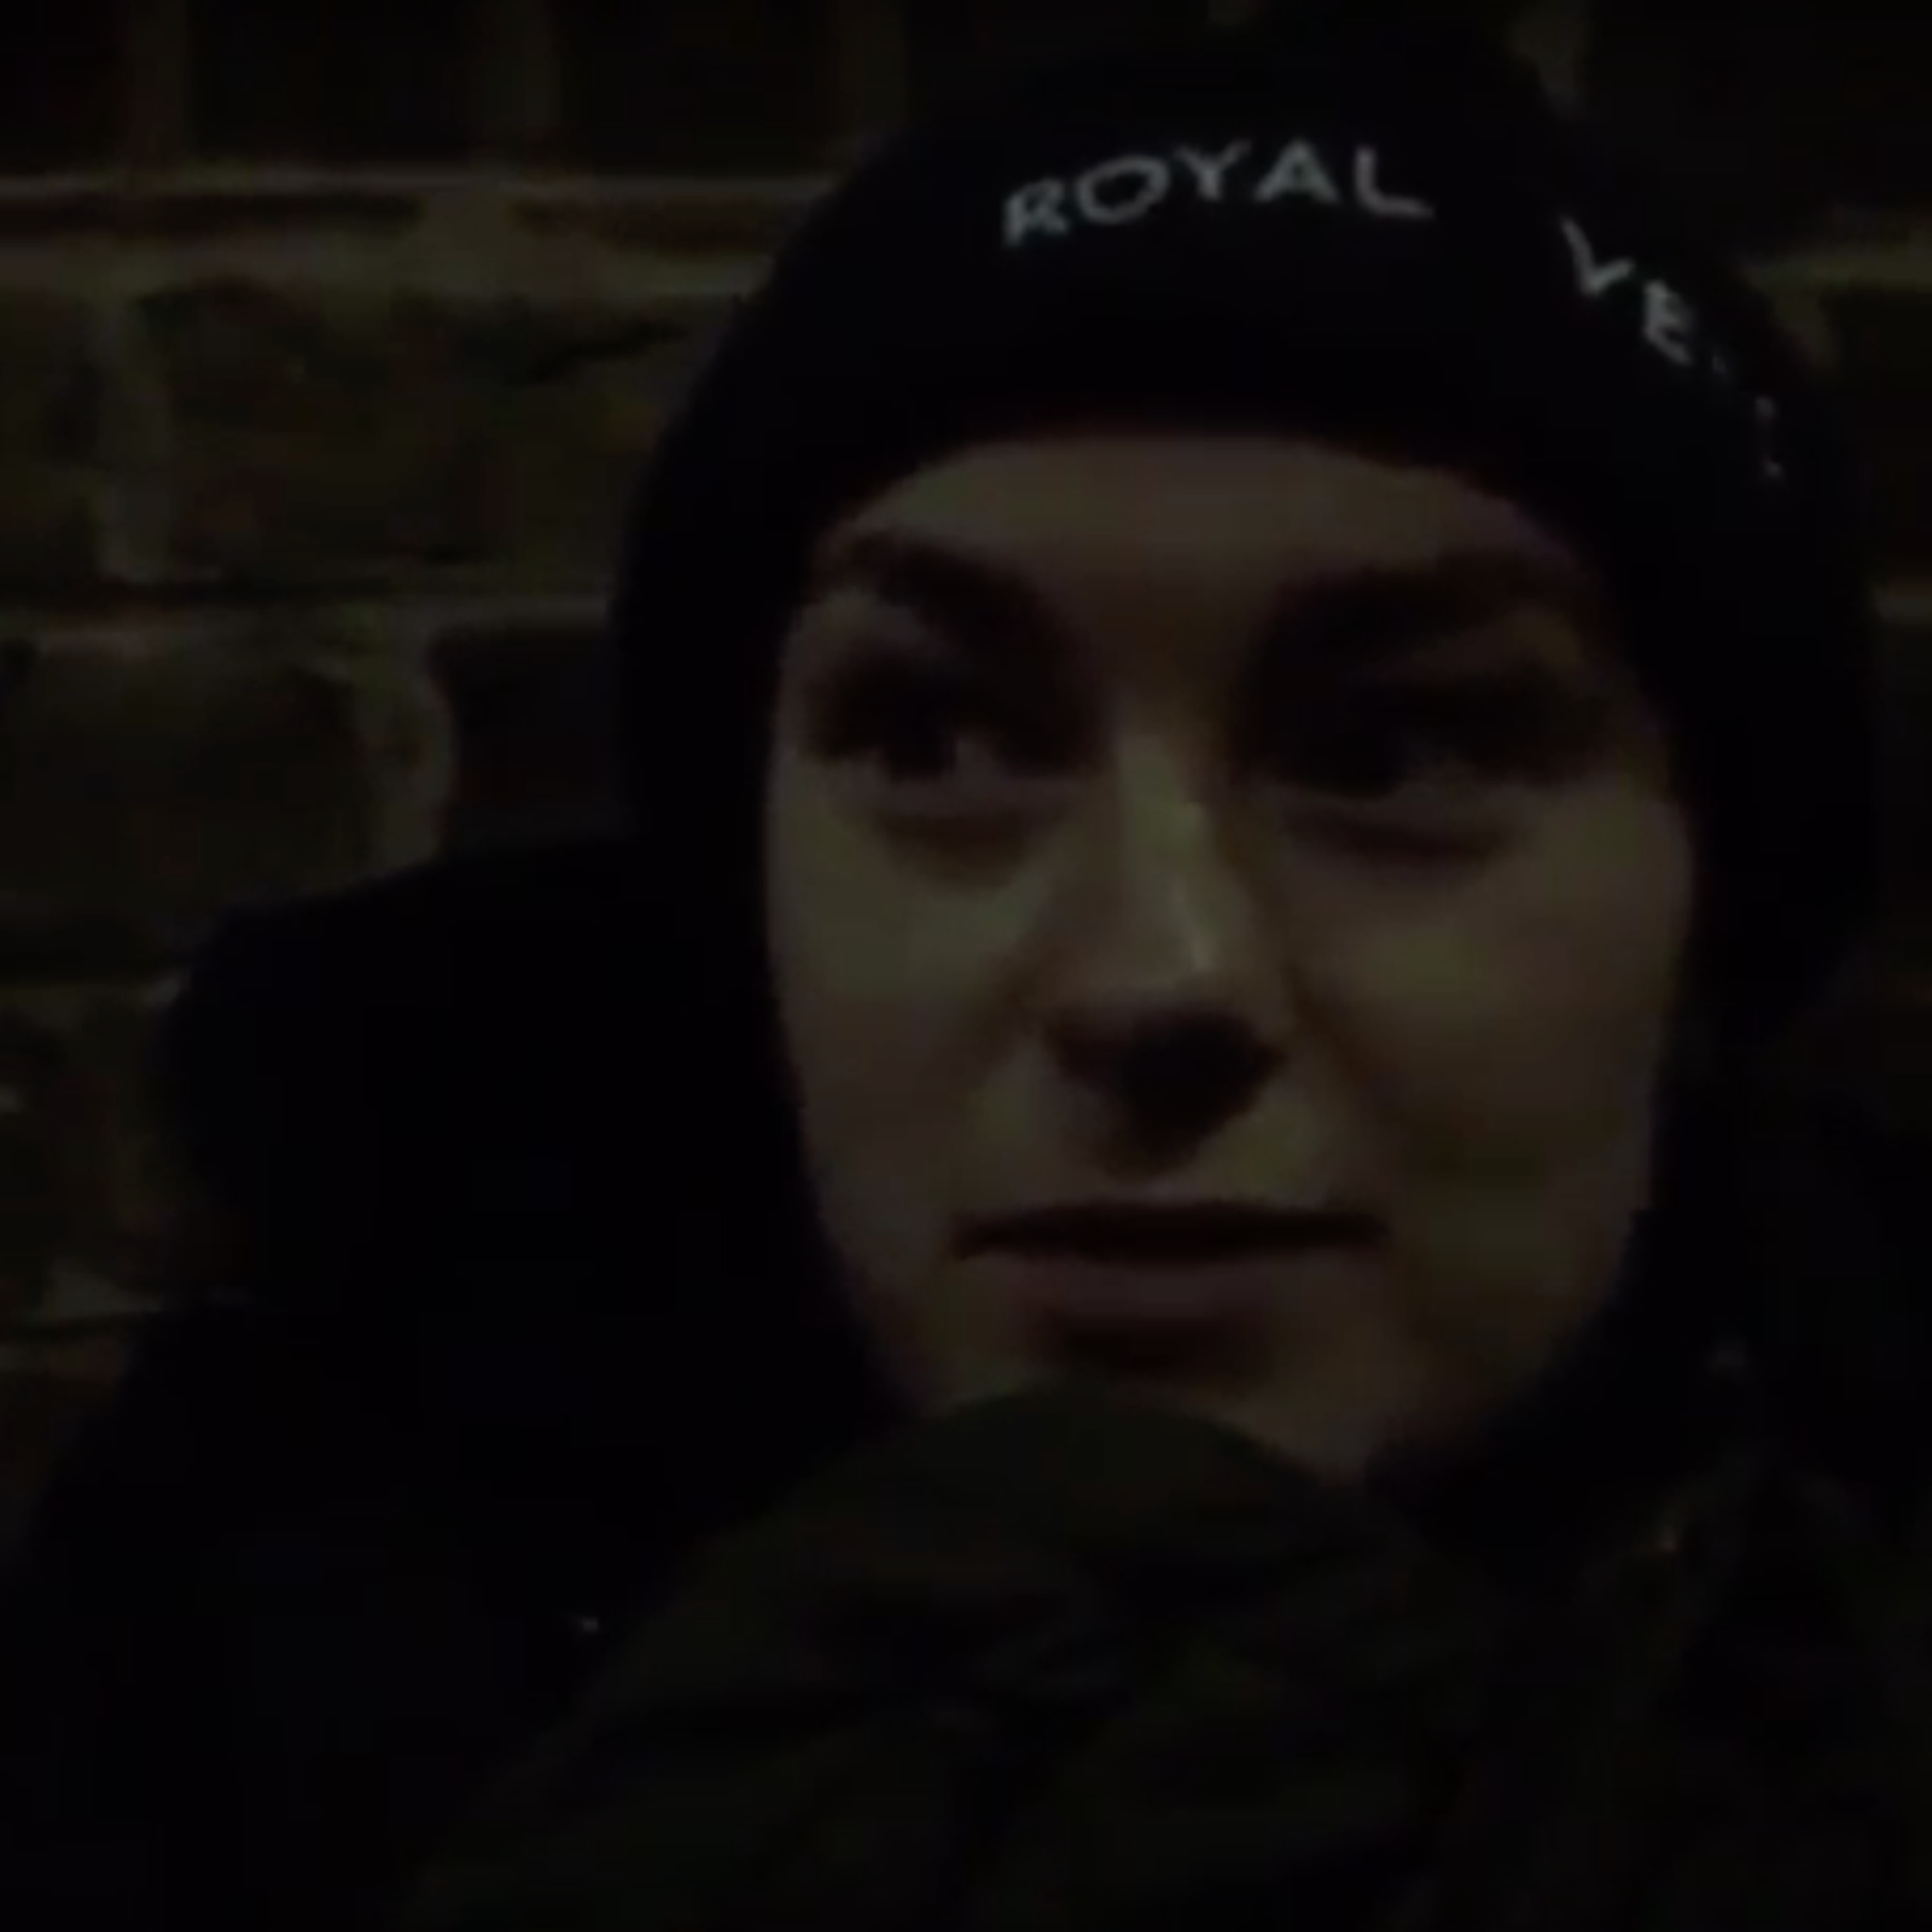 We followed 15 LGBT+ young people who slept rough for the first time